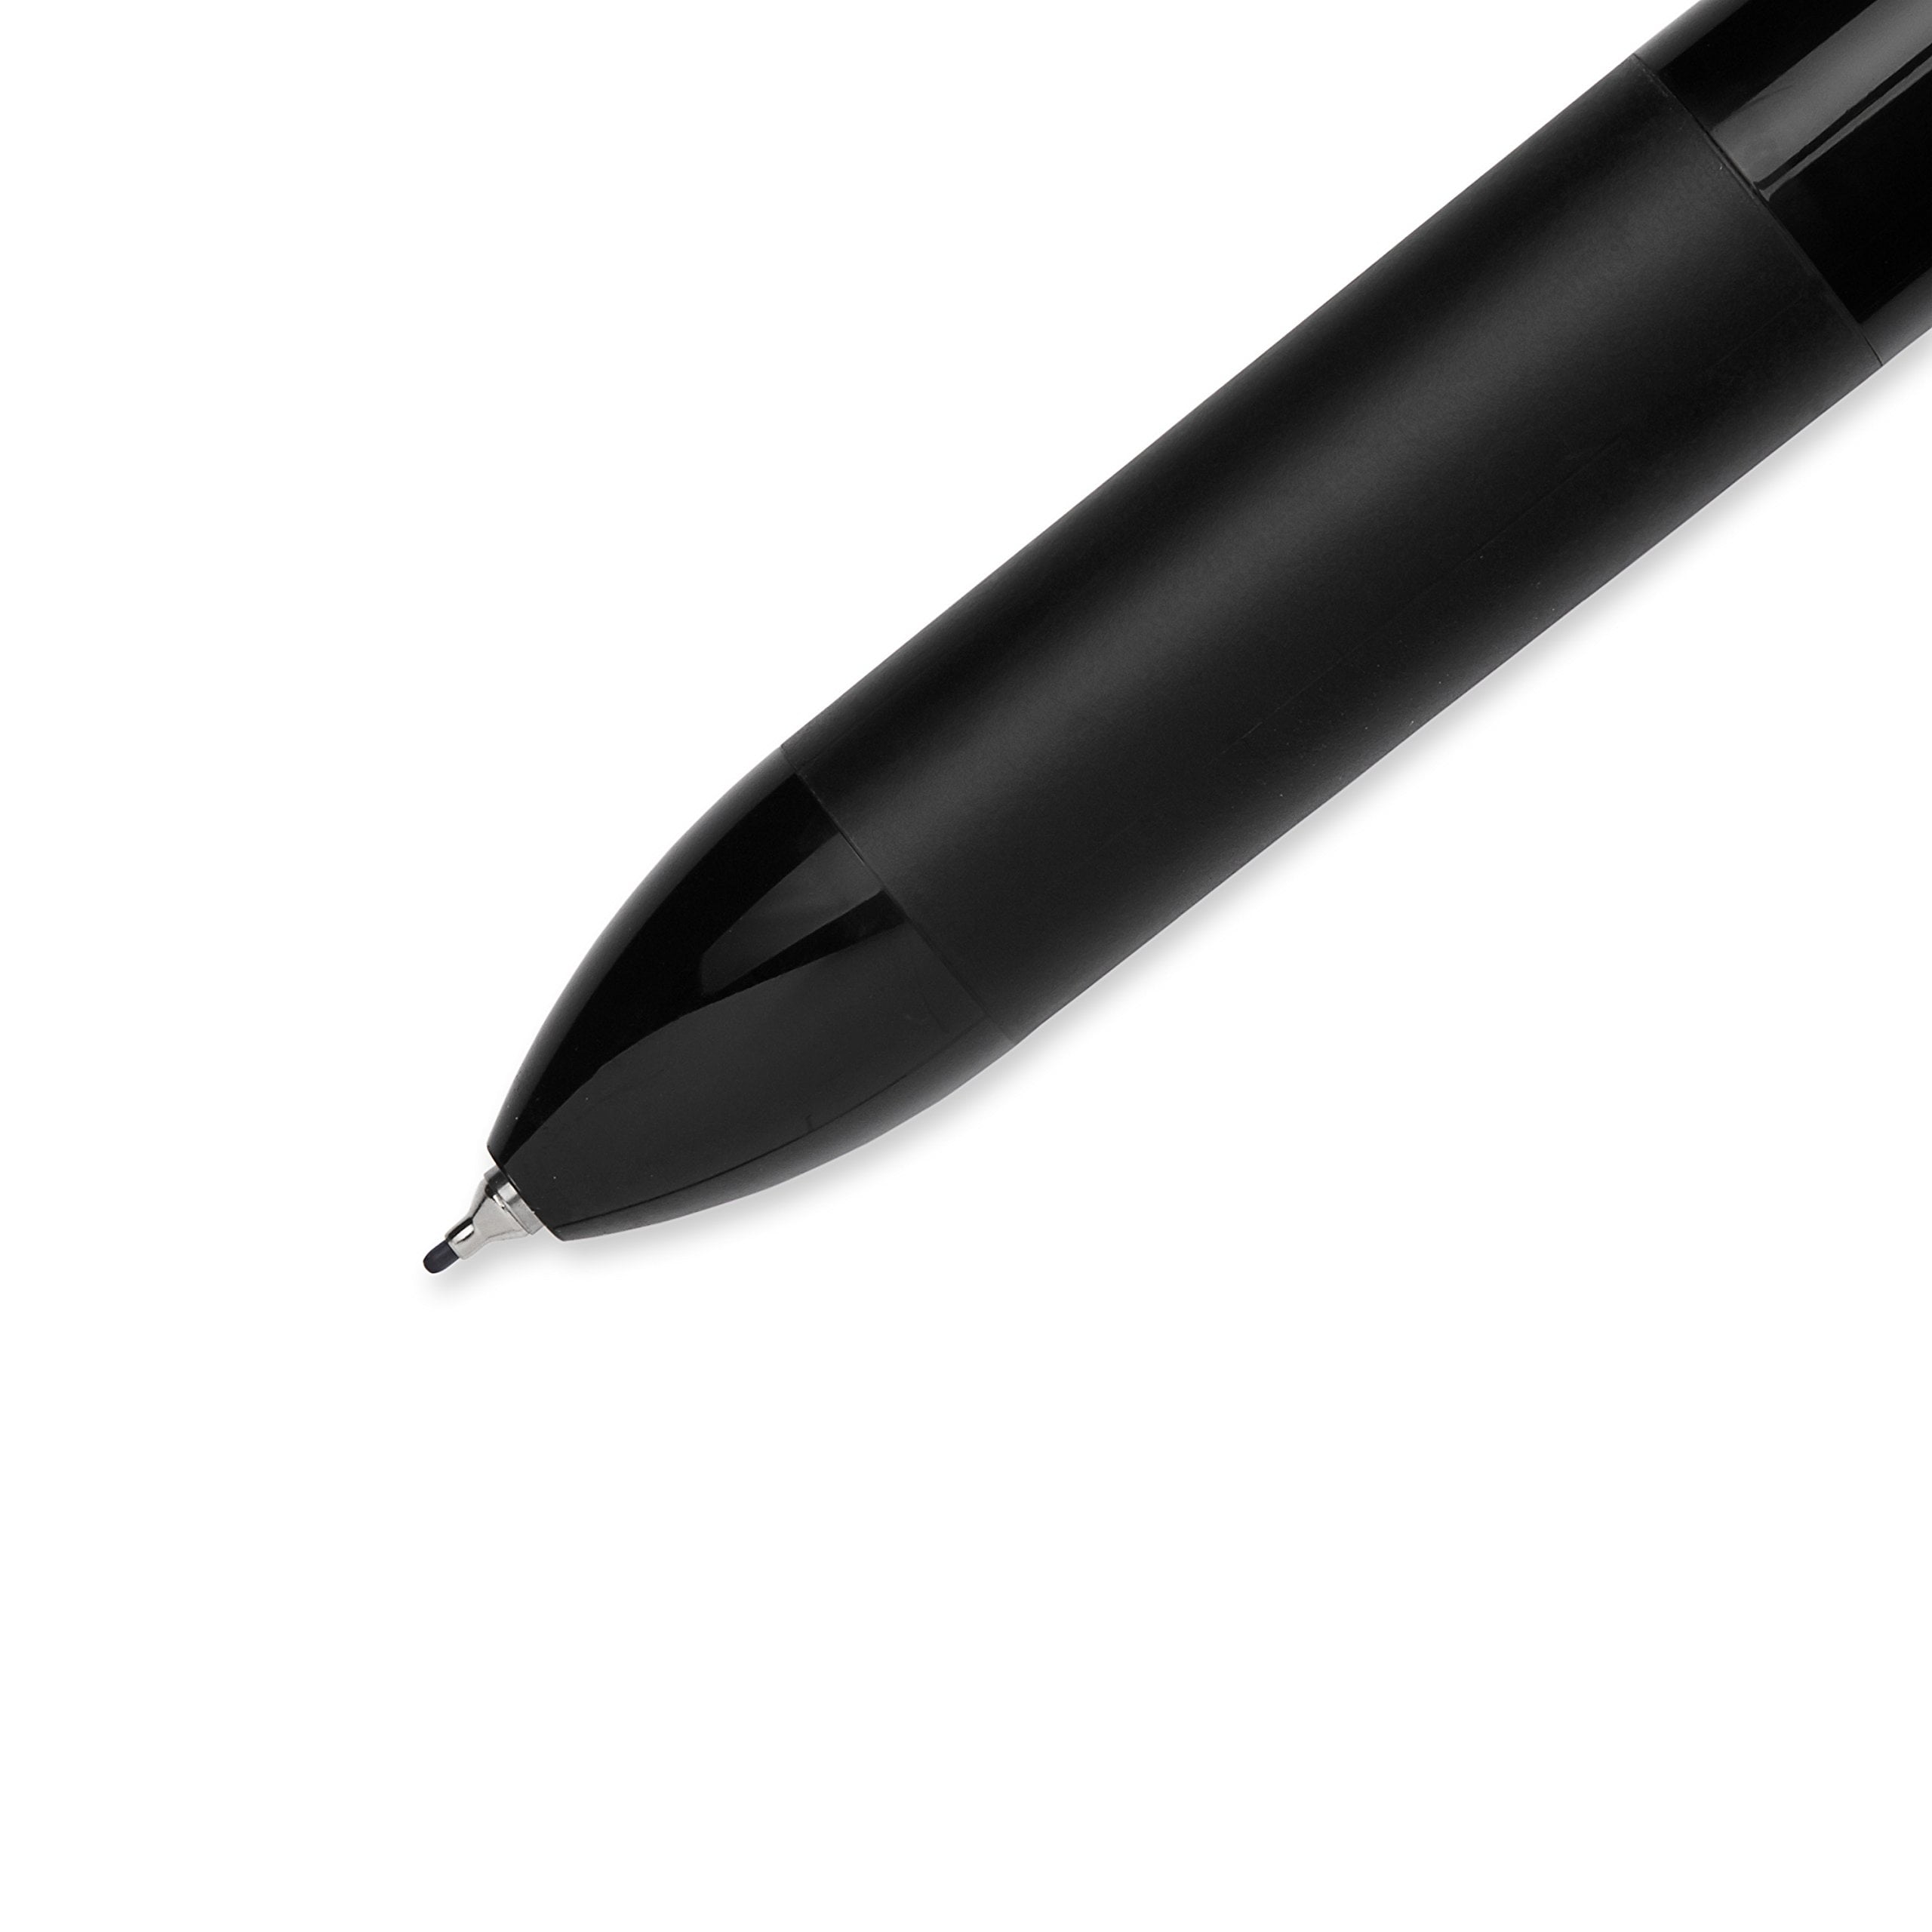 Water-Resistant Ink Porous Point Pen by Sharpie® SAN1742664